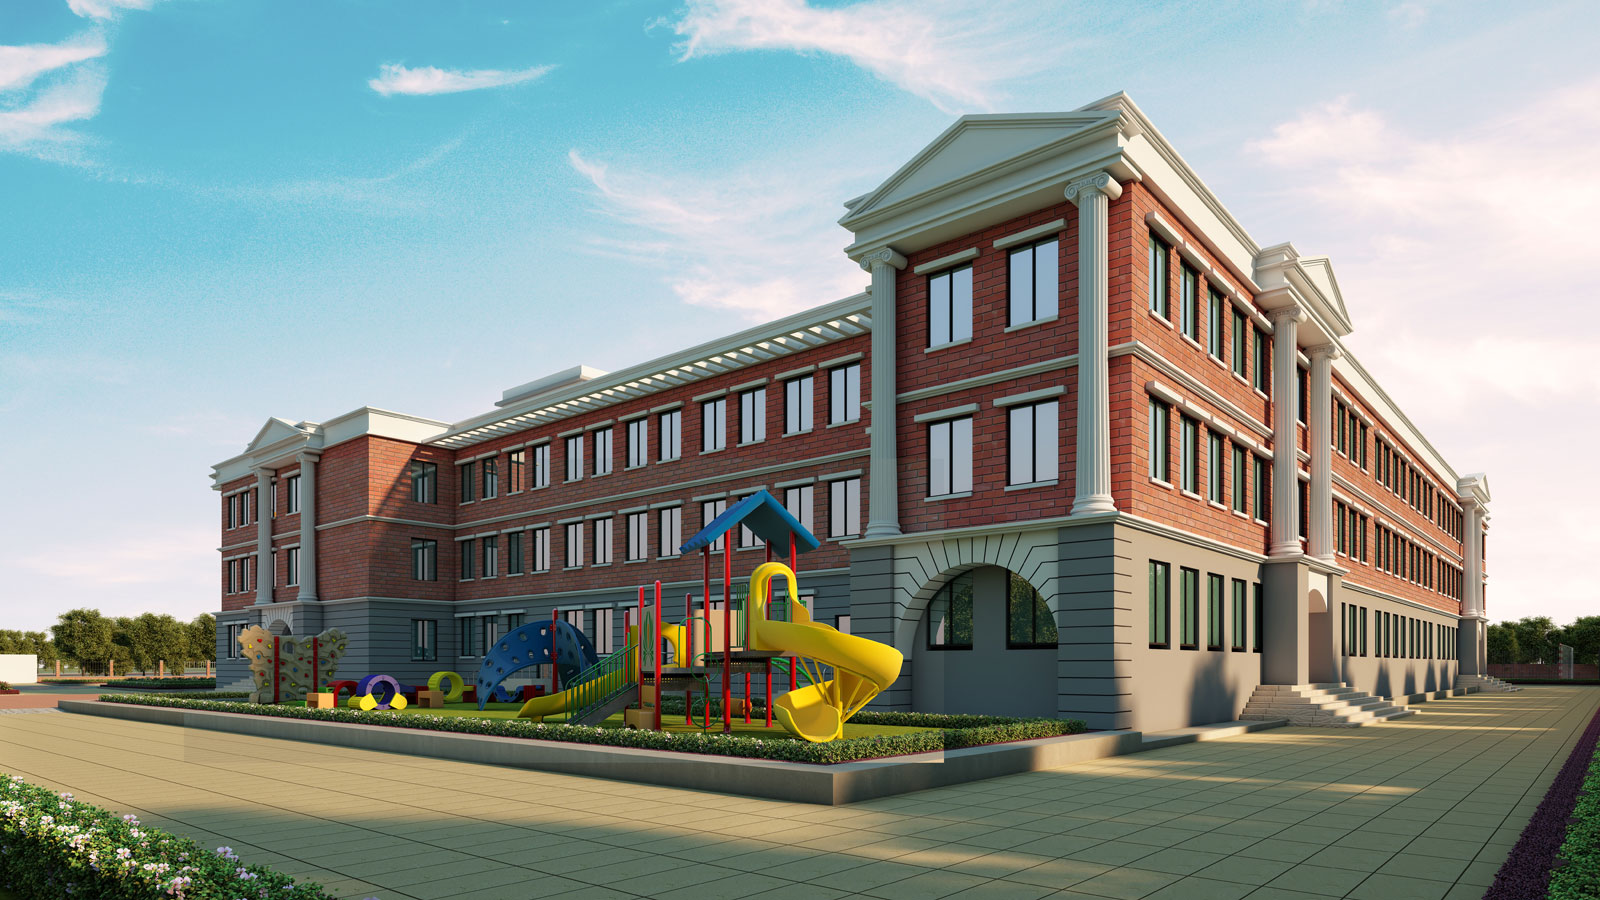 BEST STRUCTURAL CONSULTANTS AND DESIGN FOR SCHOOL BUILDINGS IN INDIA